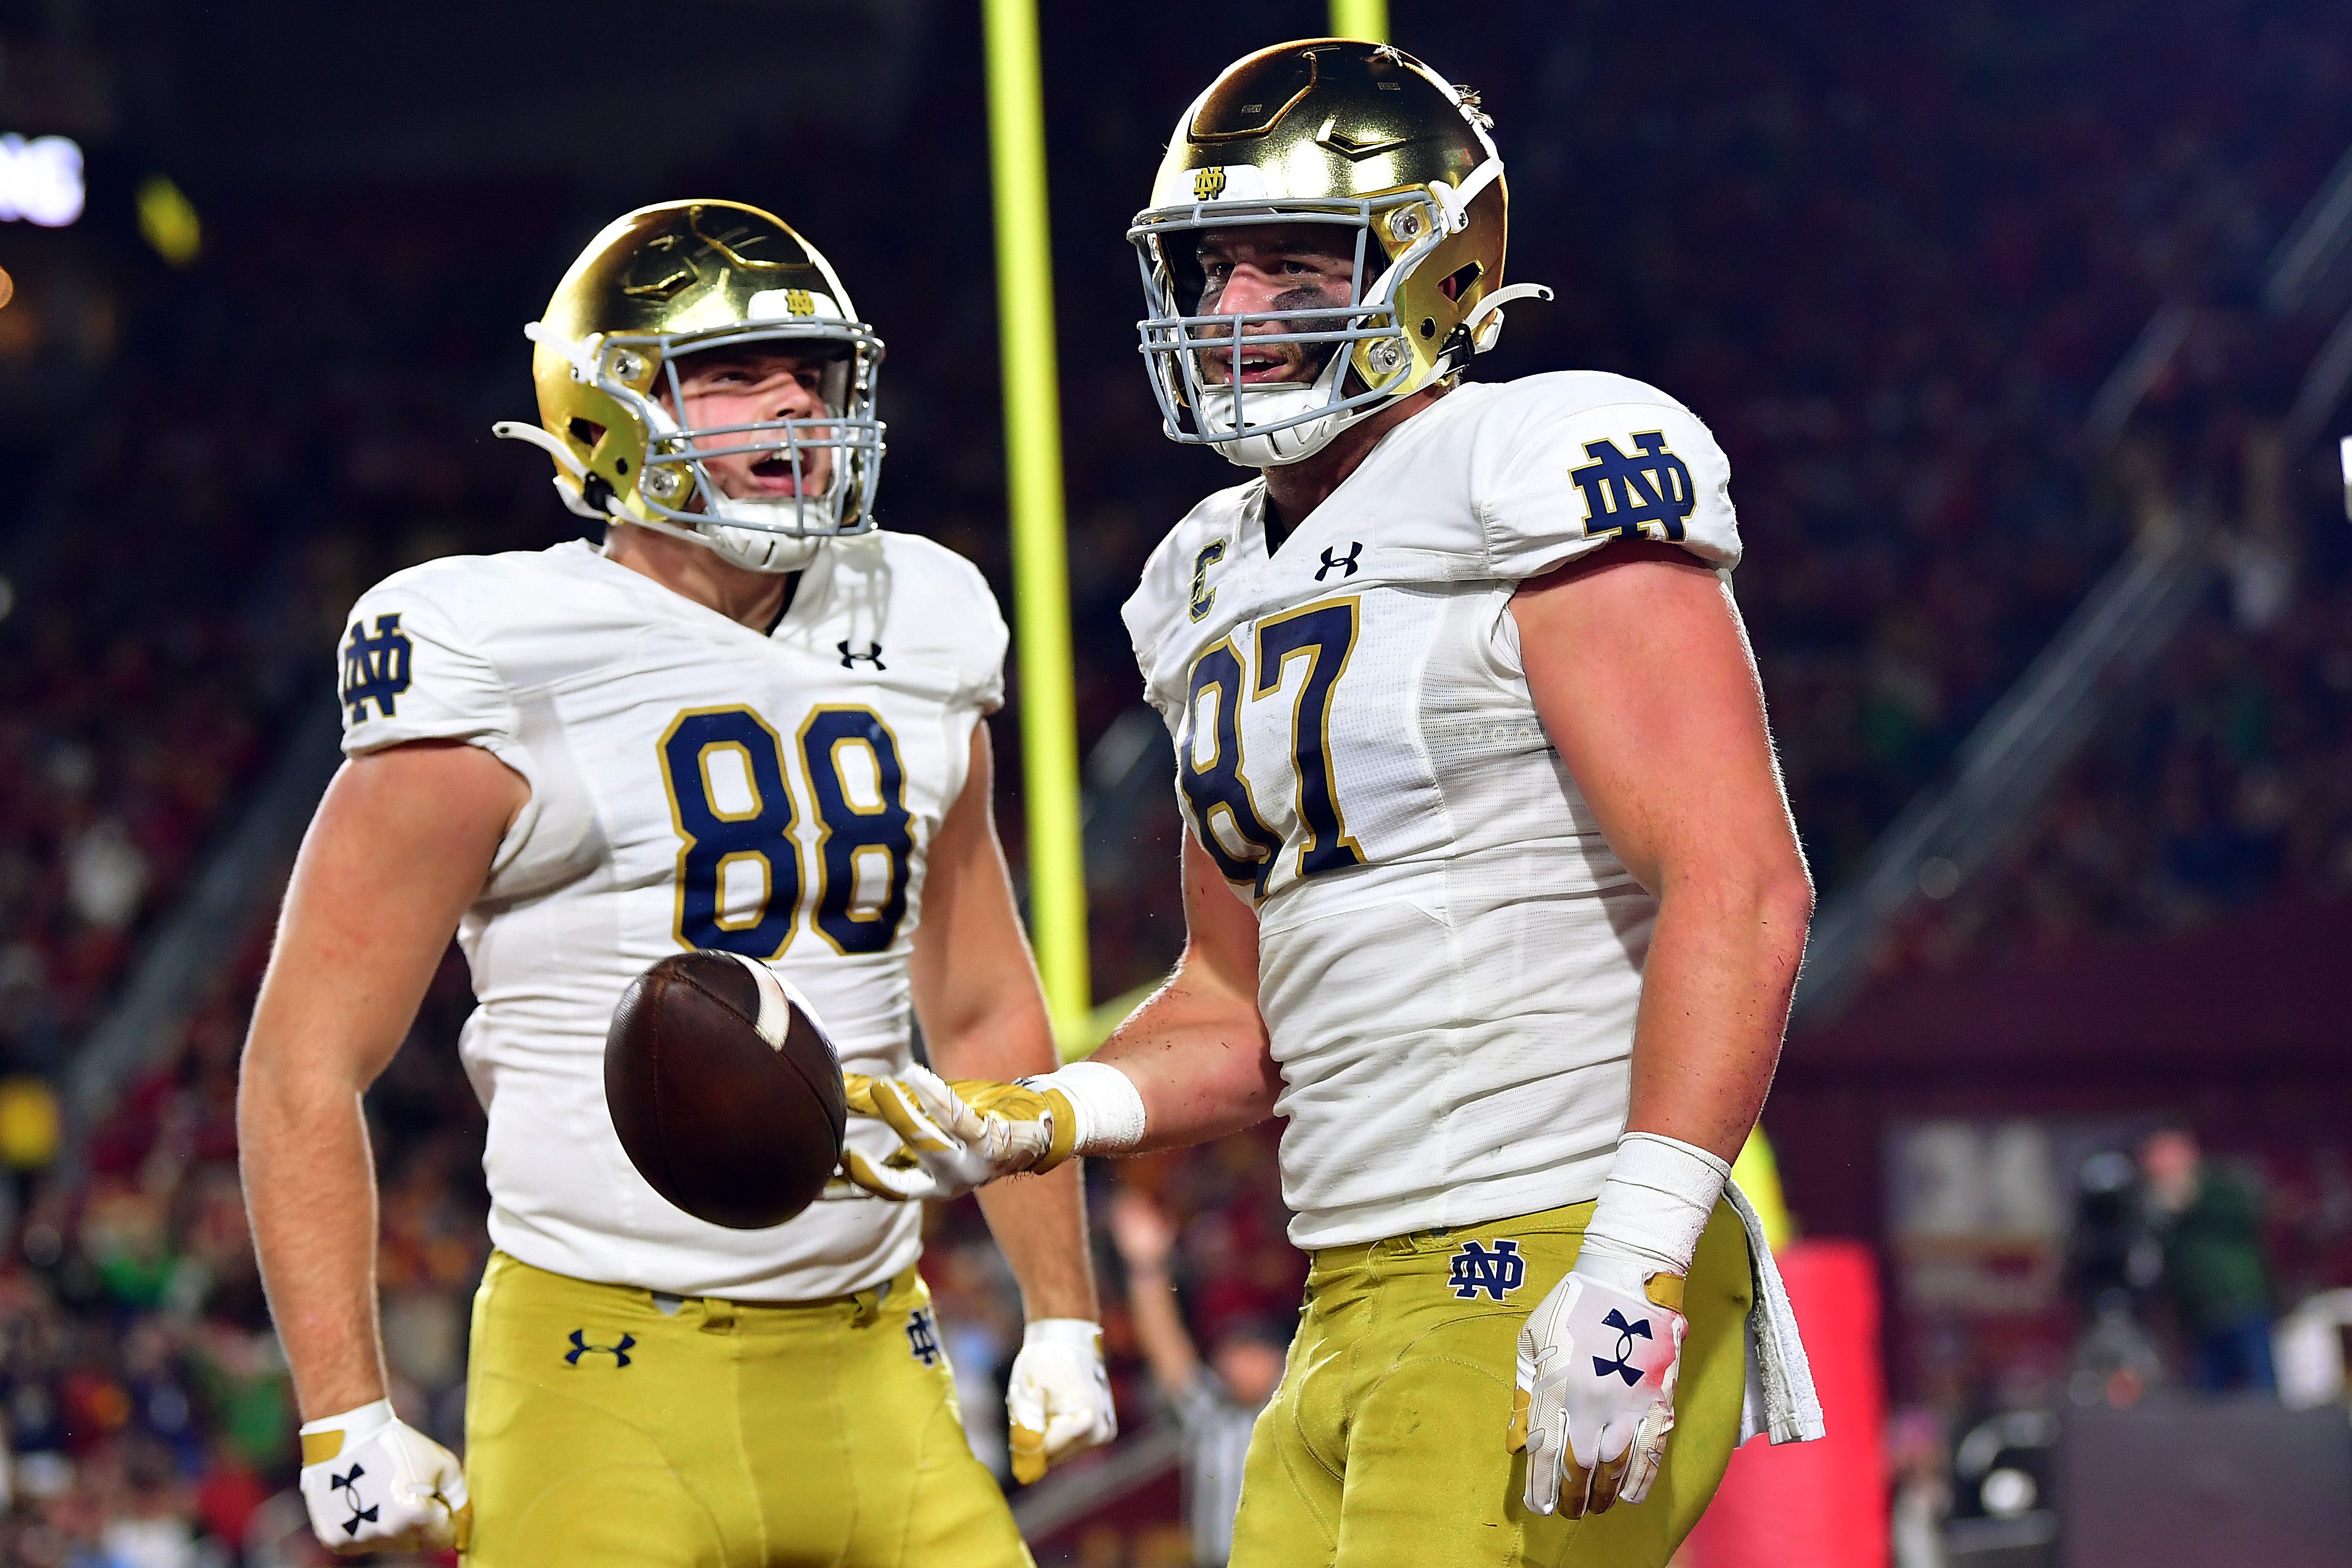 Nov 26, 2022; Los Angeles, California, USA; Notre Dame Fighting Irish tight end Michael Mayer (87) celebrates his touchdown scored against the Southern California Trojans with tight end Mitchell Evans (88) during the first half at the Los Angeles Memorial Coliseum. Mandatory Credit: Gary A. Vasquez-USA TODAY Sports